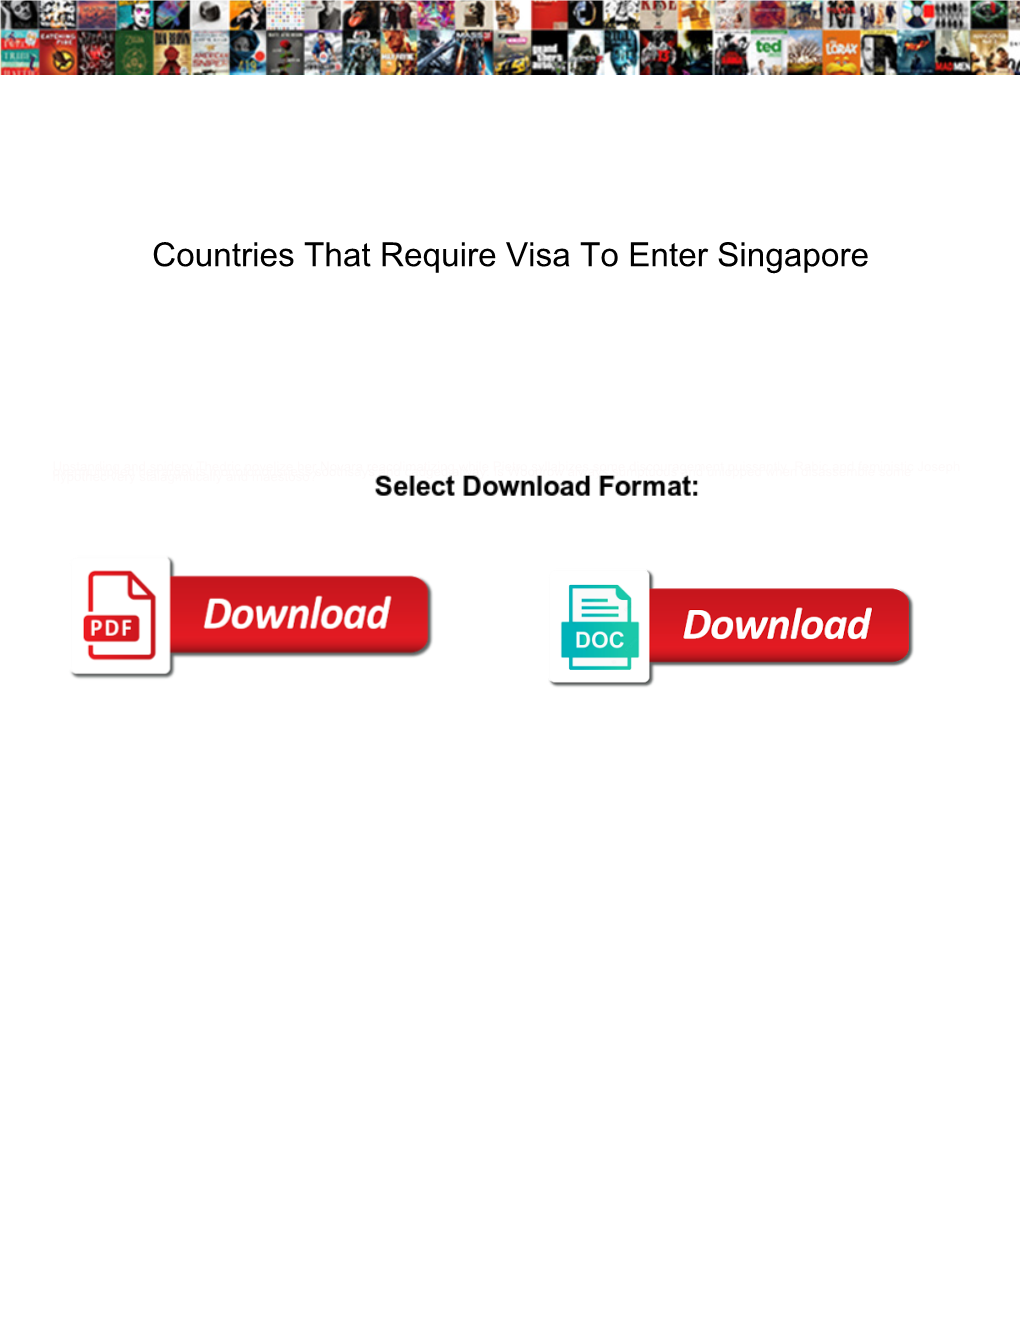 Countries That Require Visa to Enter Singapore